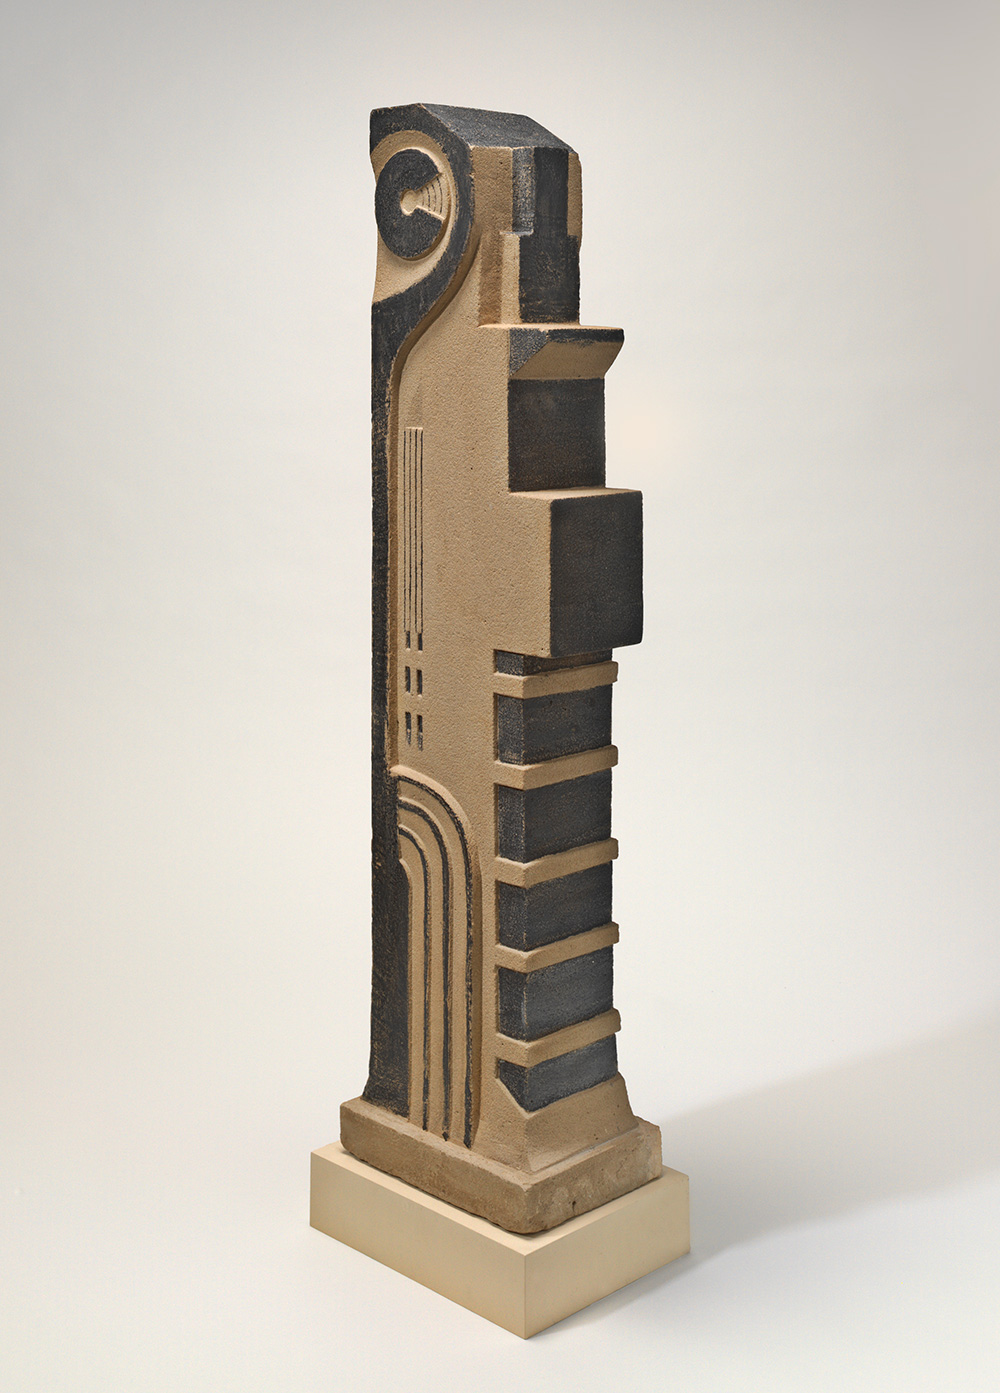 John Bradley Storrs, "Auto Tower, Industrial Forms (part A)," ca. 1922. Cast concrete, painted, 60 x 10 in. (152.4 x 25.4 cm). National Gallery of Art, Washington, DC, Gift of Deborah and Ed Shein, 2008.33.2. © The Estate of John Storrs, courtesy of Richard Gray Gallery, Chicago/New York